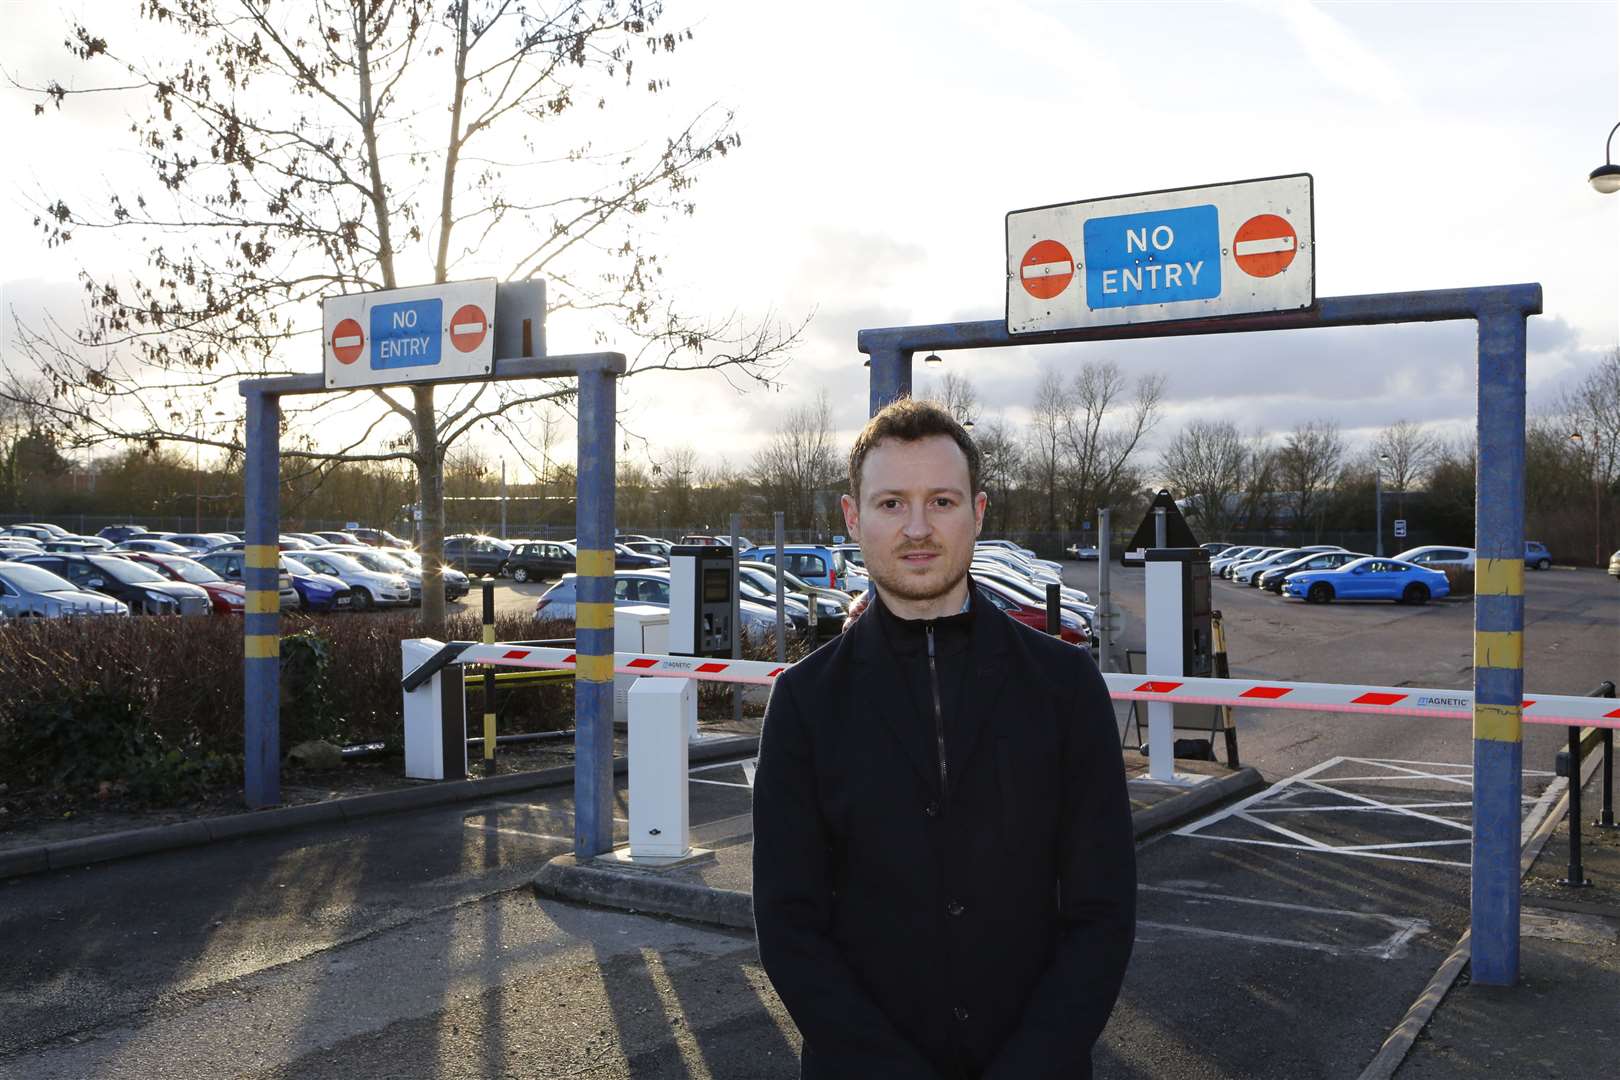 Canterbury City Council leader Ben Fitter-Harding at Wincheap park and ride